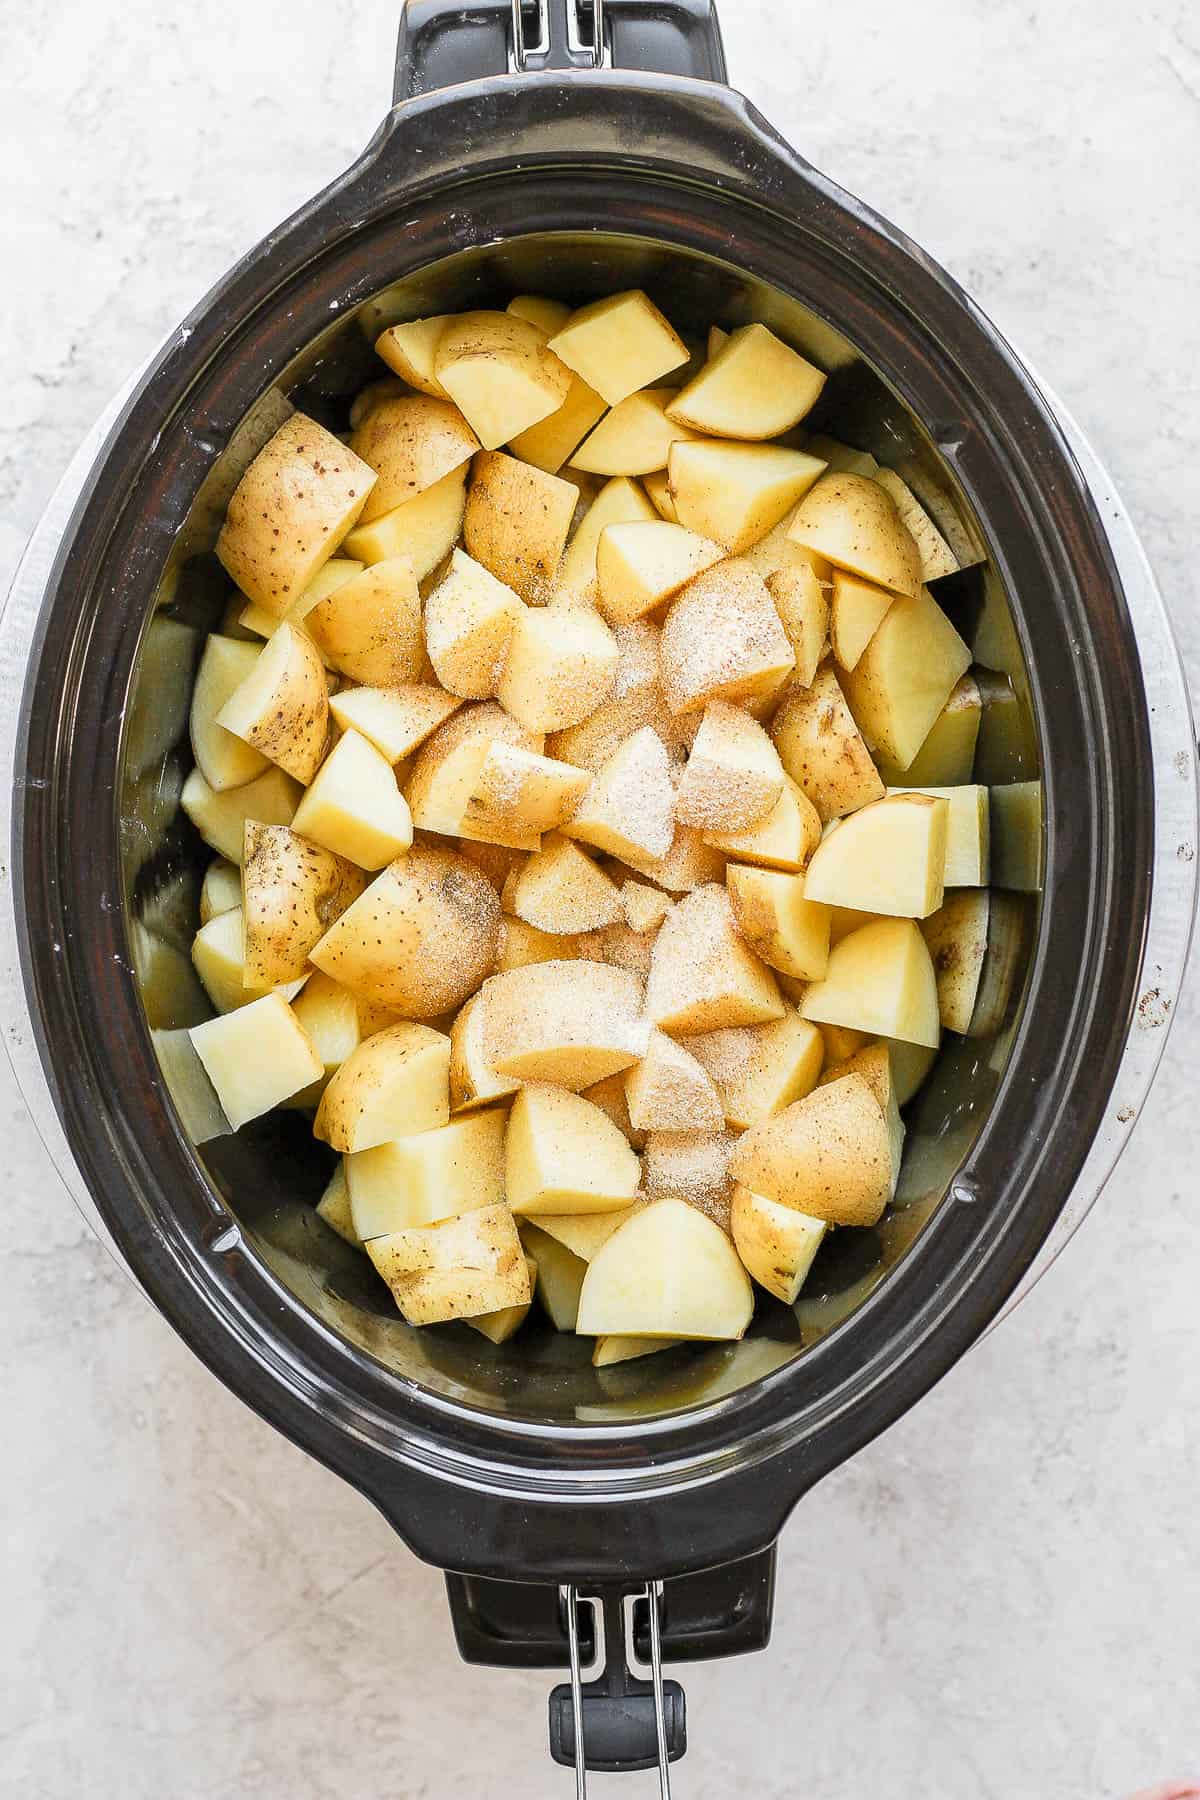 Garlic powder and onion powder sprinkled over the potatoes in the slow cooker.